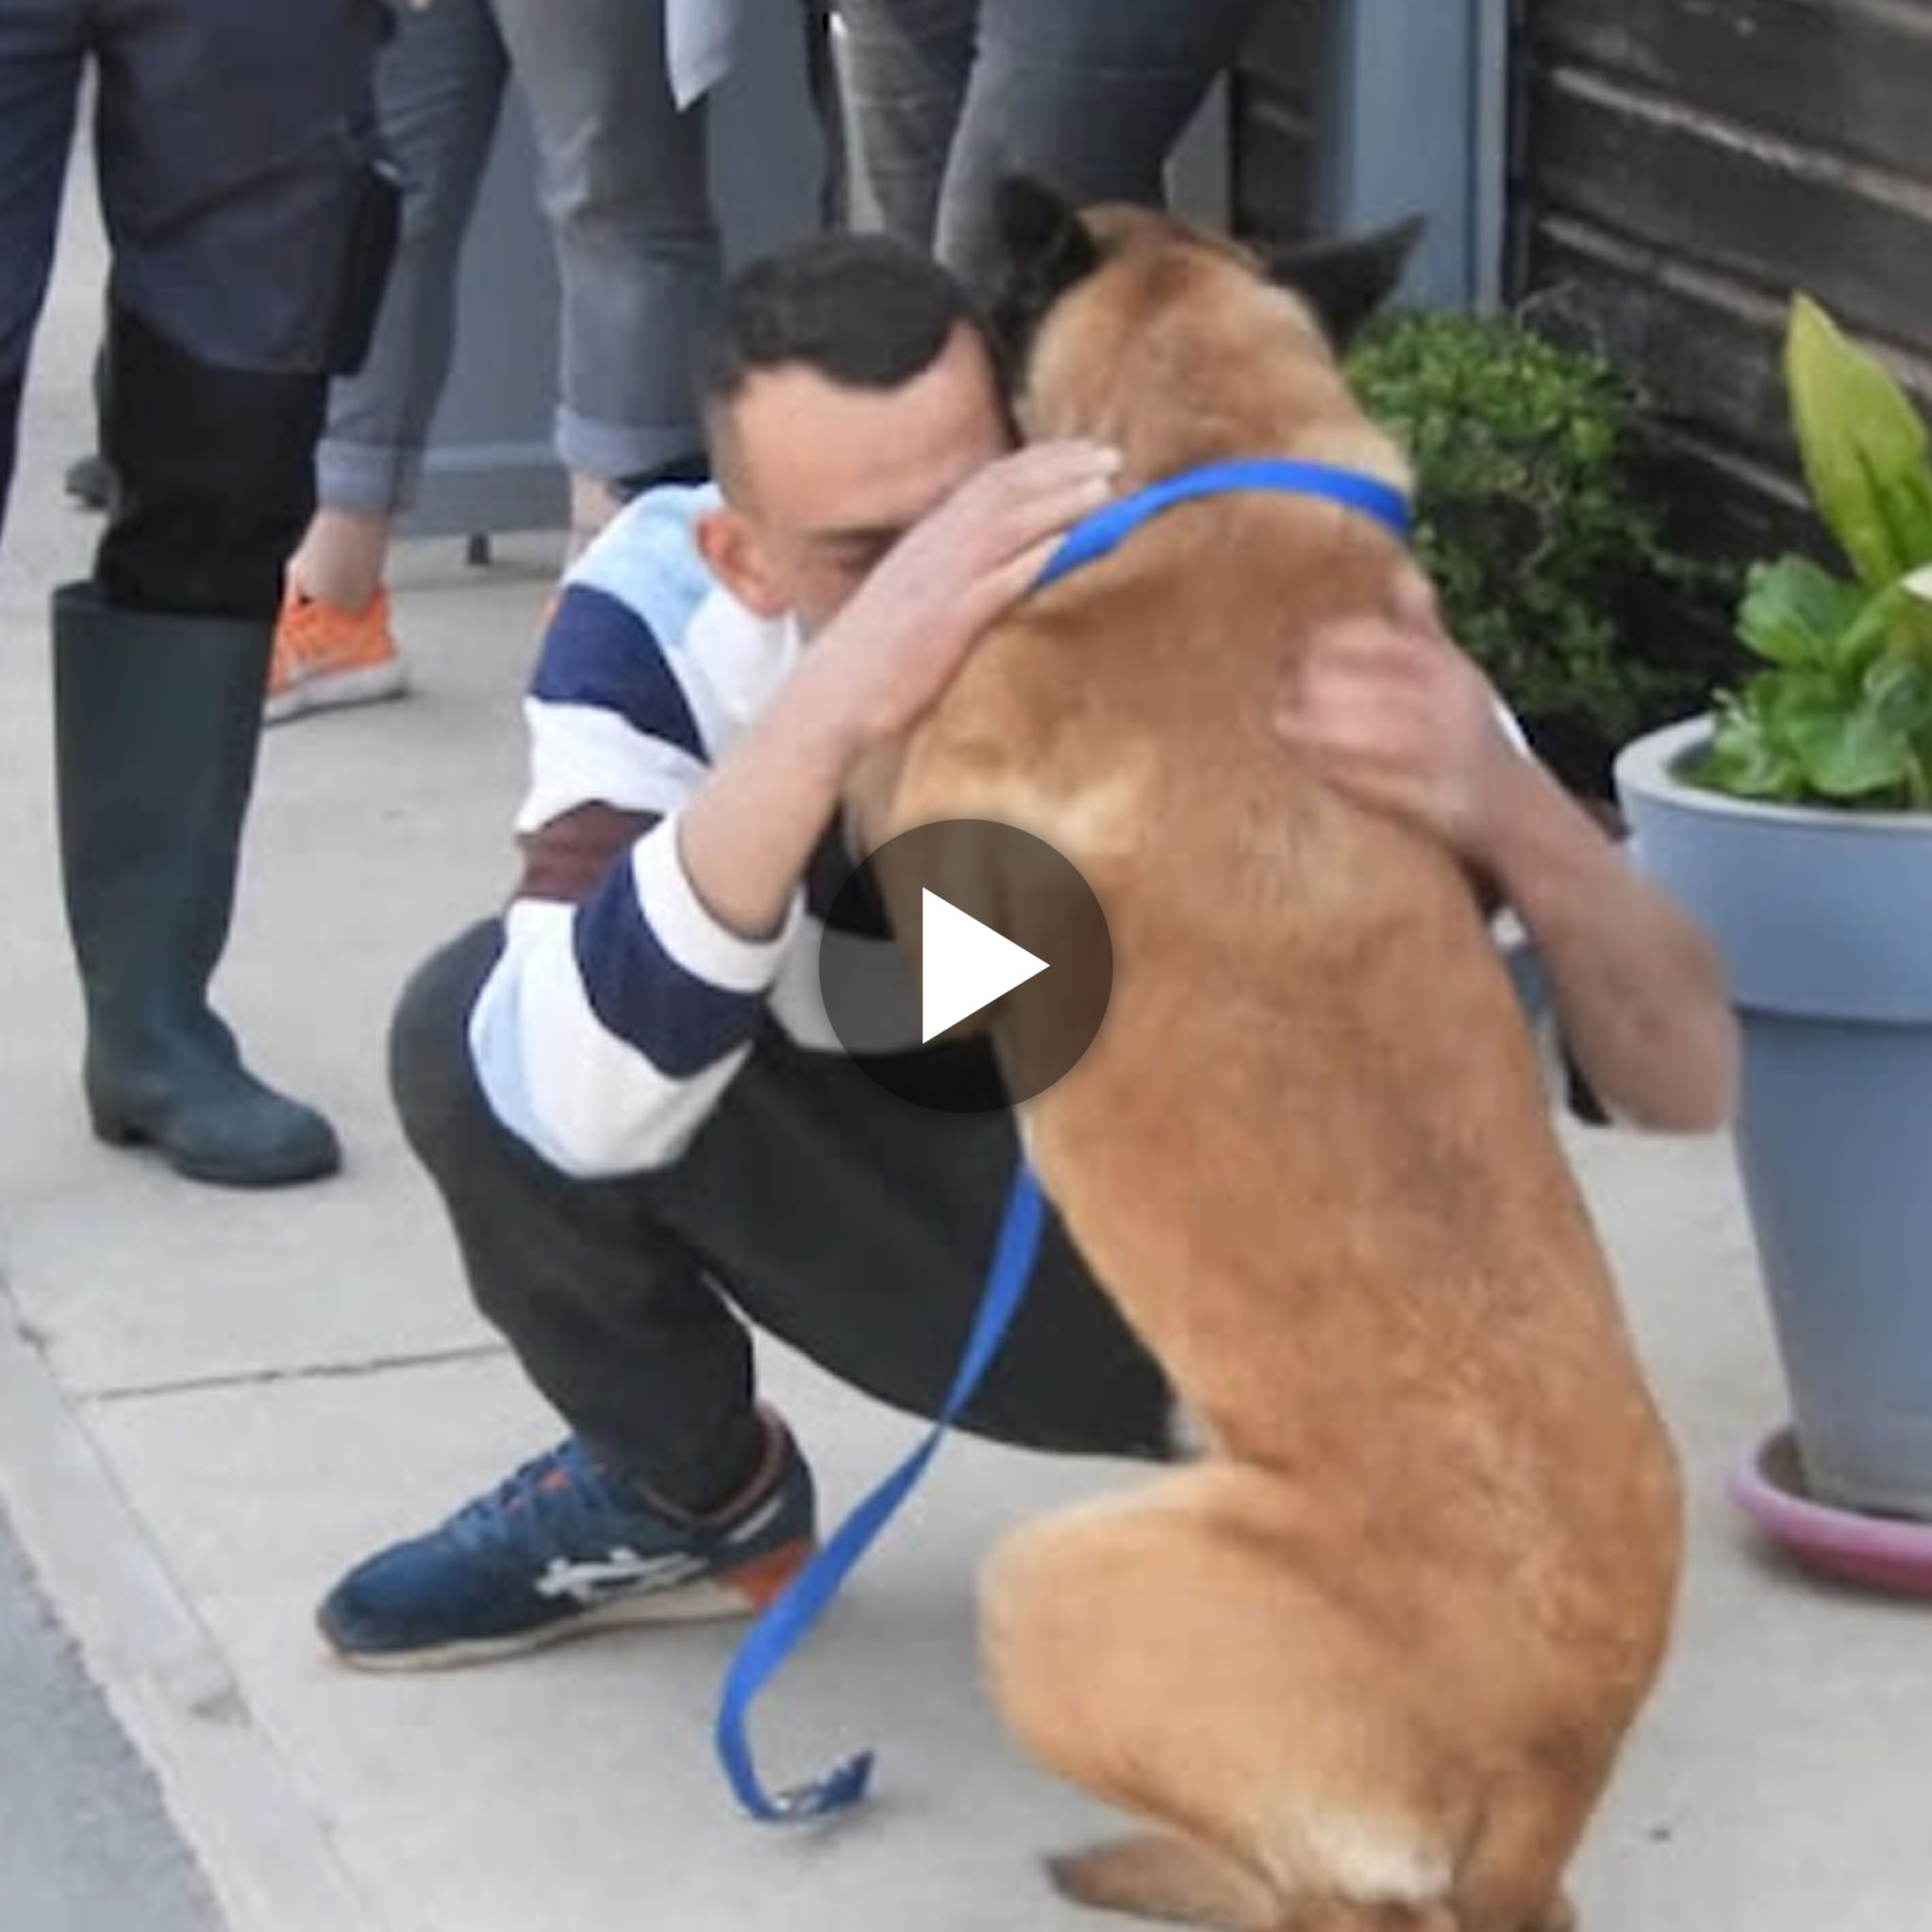 Heartfelt Reunion: Owner’s Grueling 310-Mile Journey to Find Missing 4-Legged Friend Culminates in an Emotional Reunion.